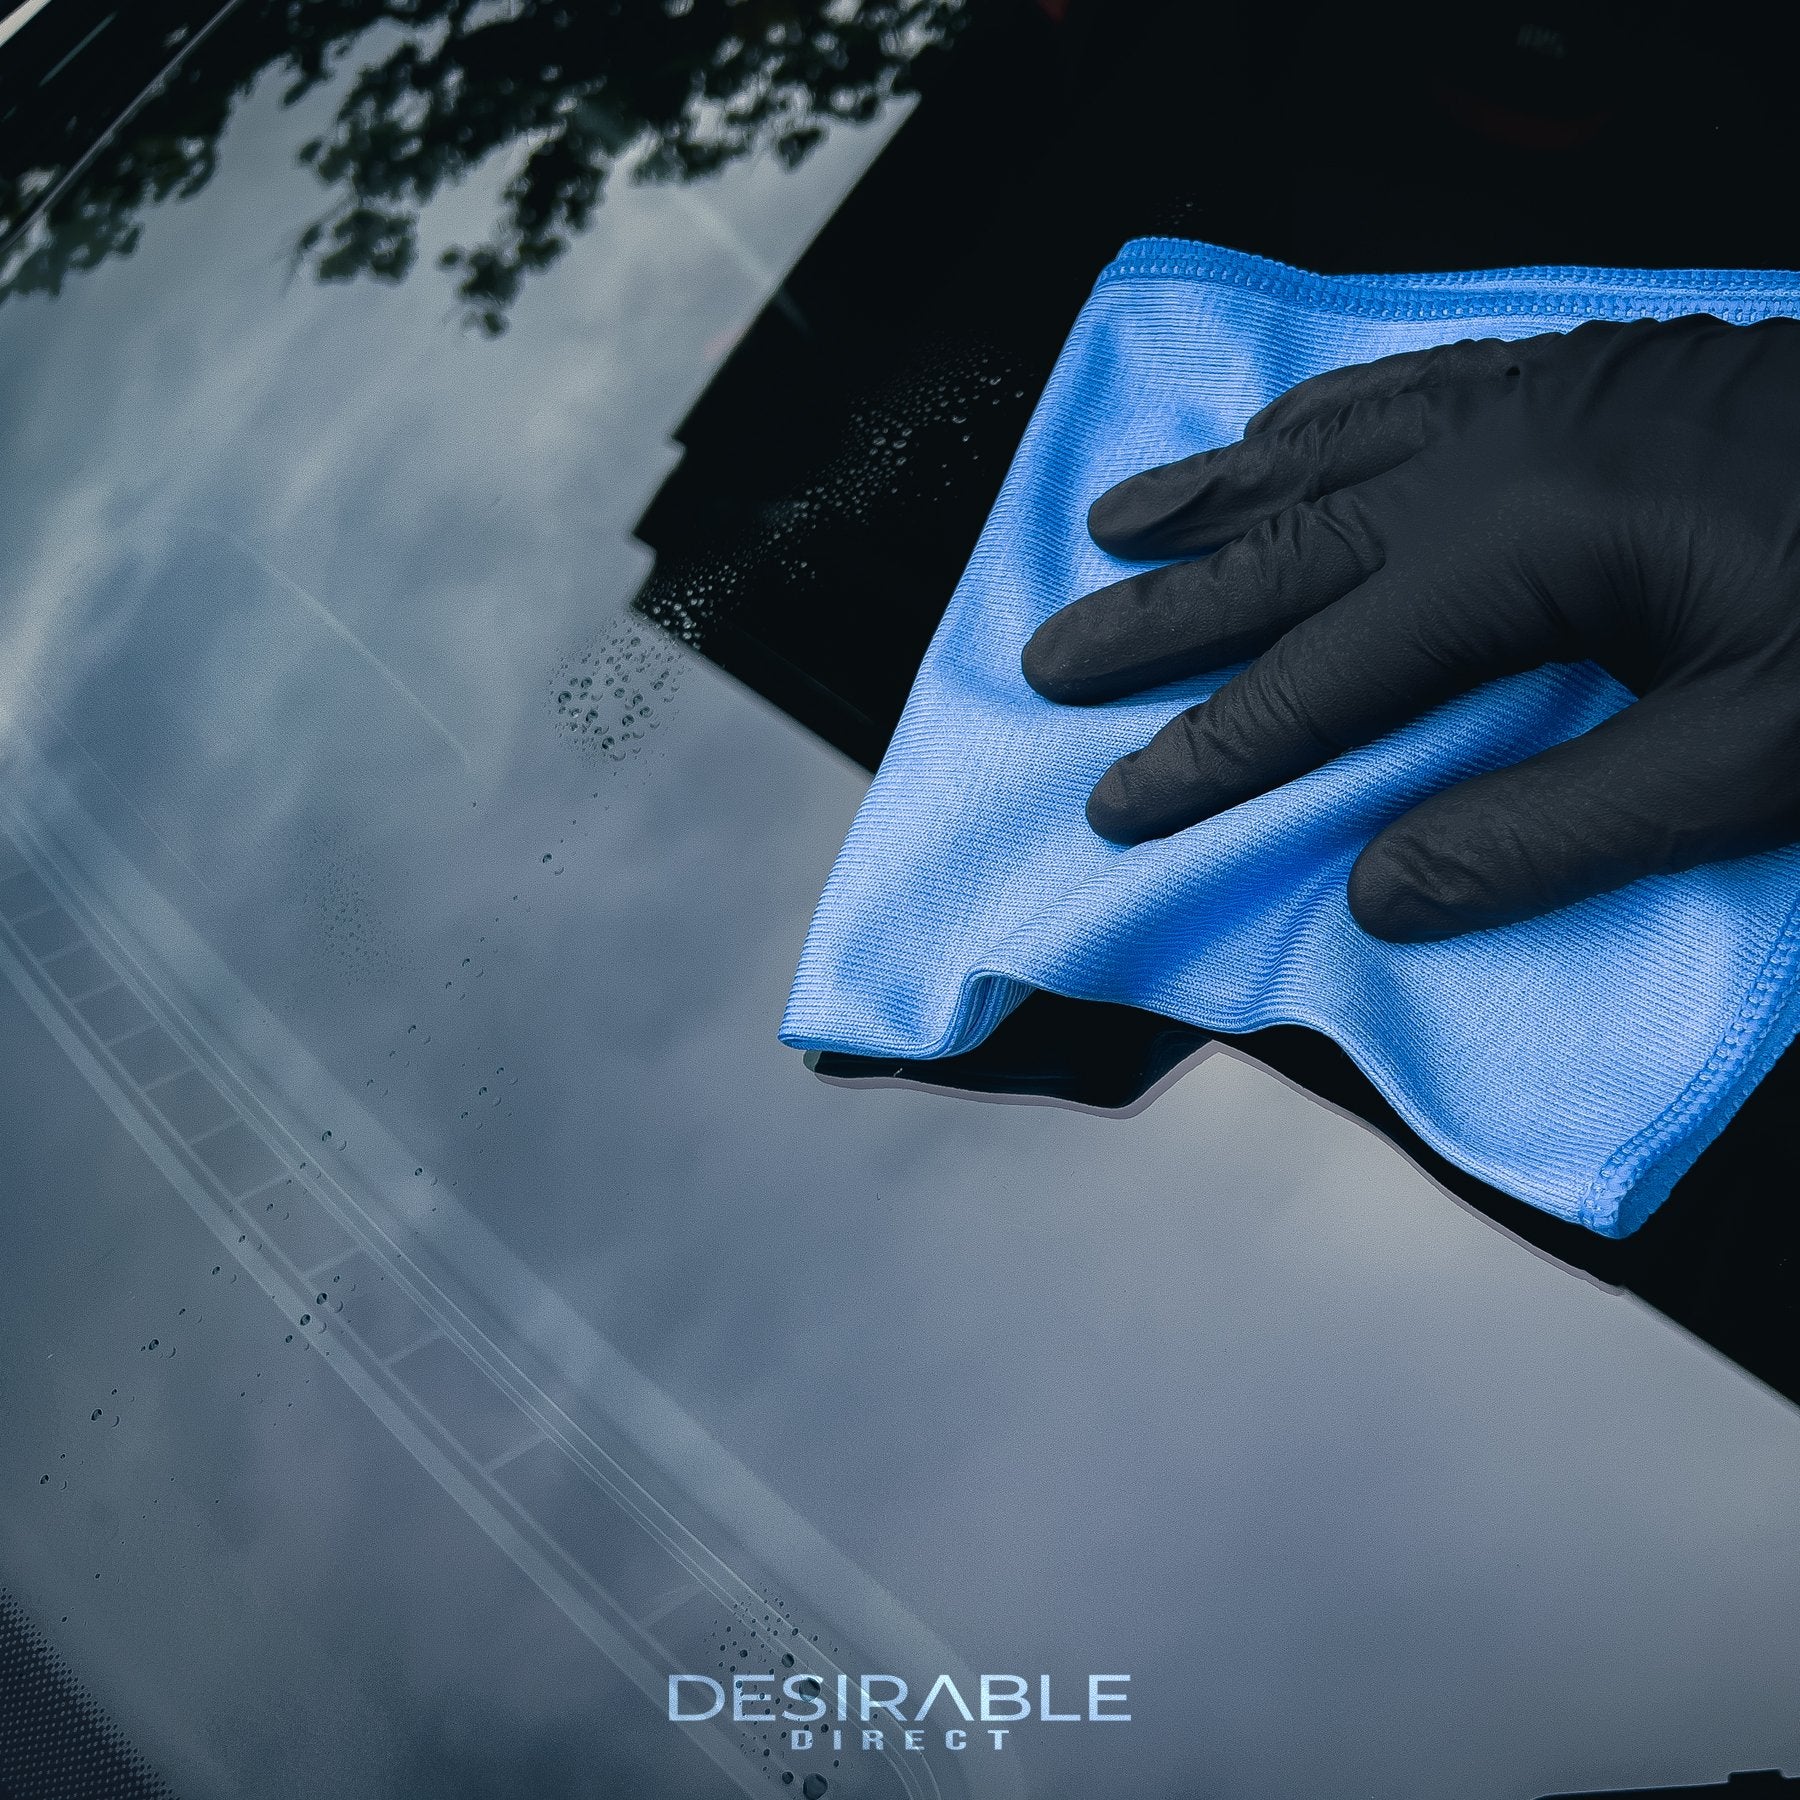 Car care microfibre blue glass cloth cleaning the windscreen of a car with glass cleaner.